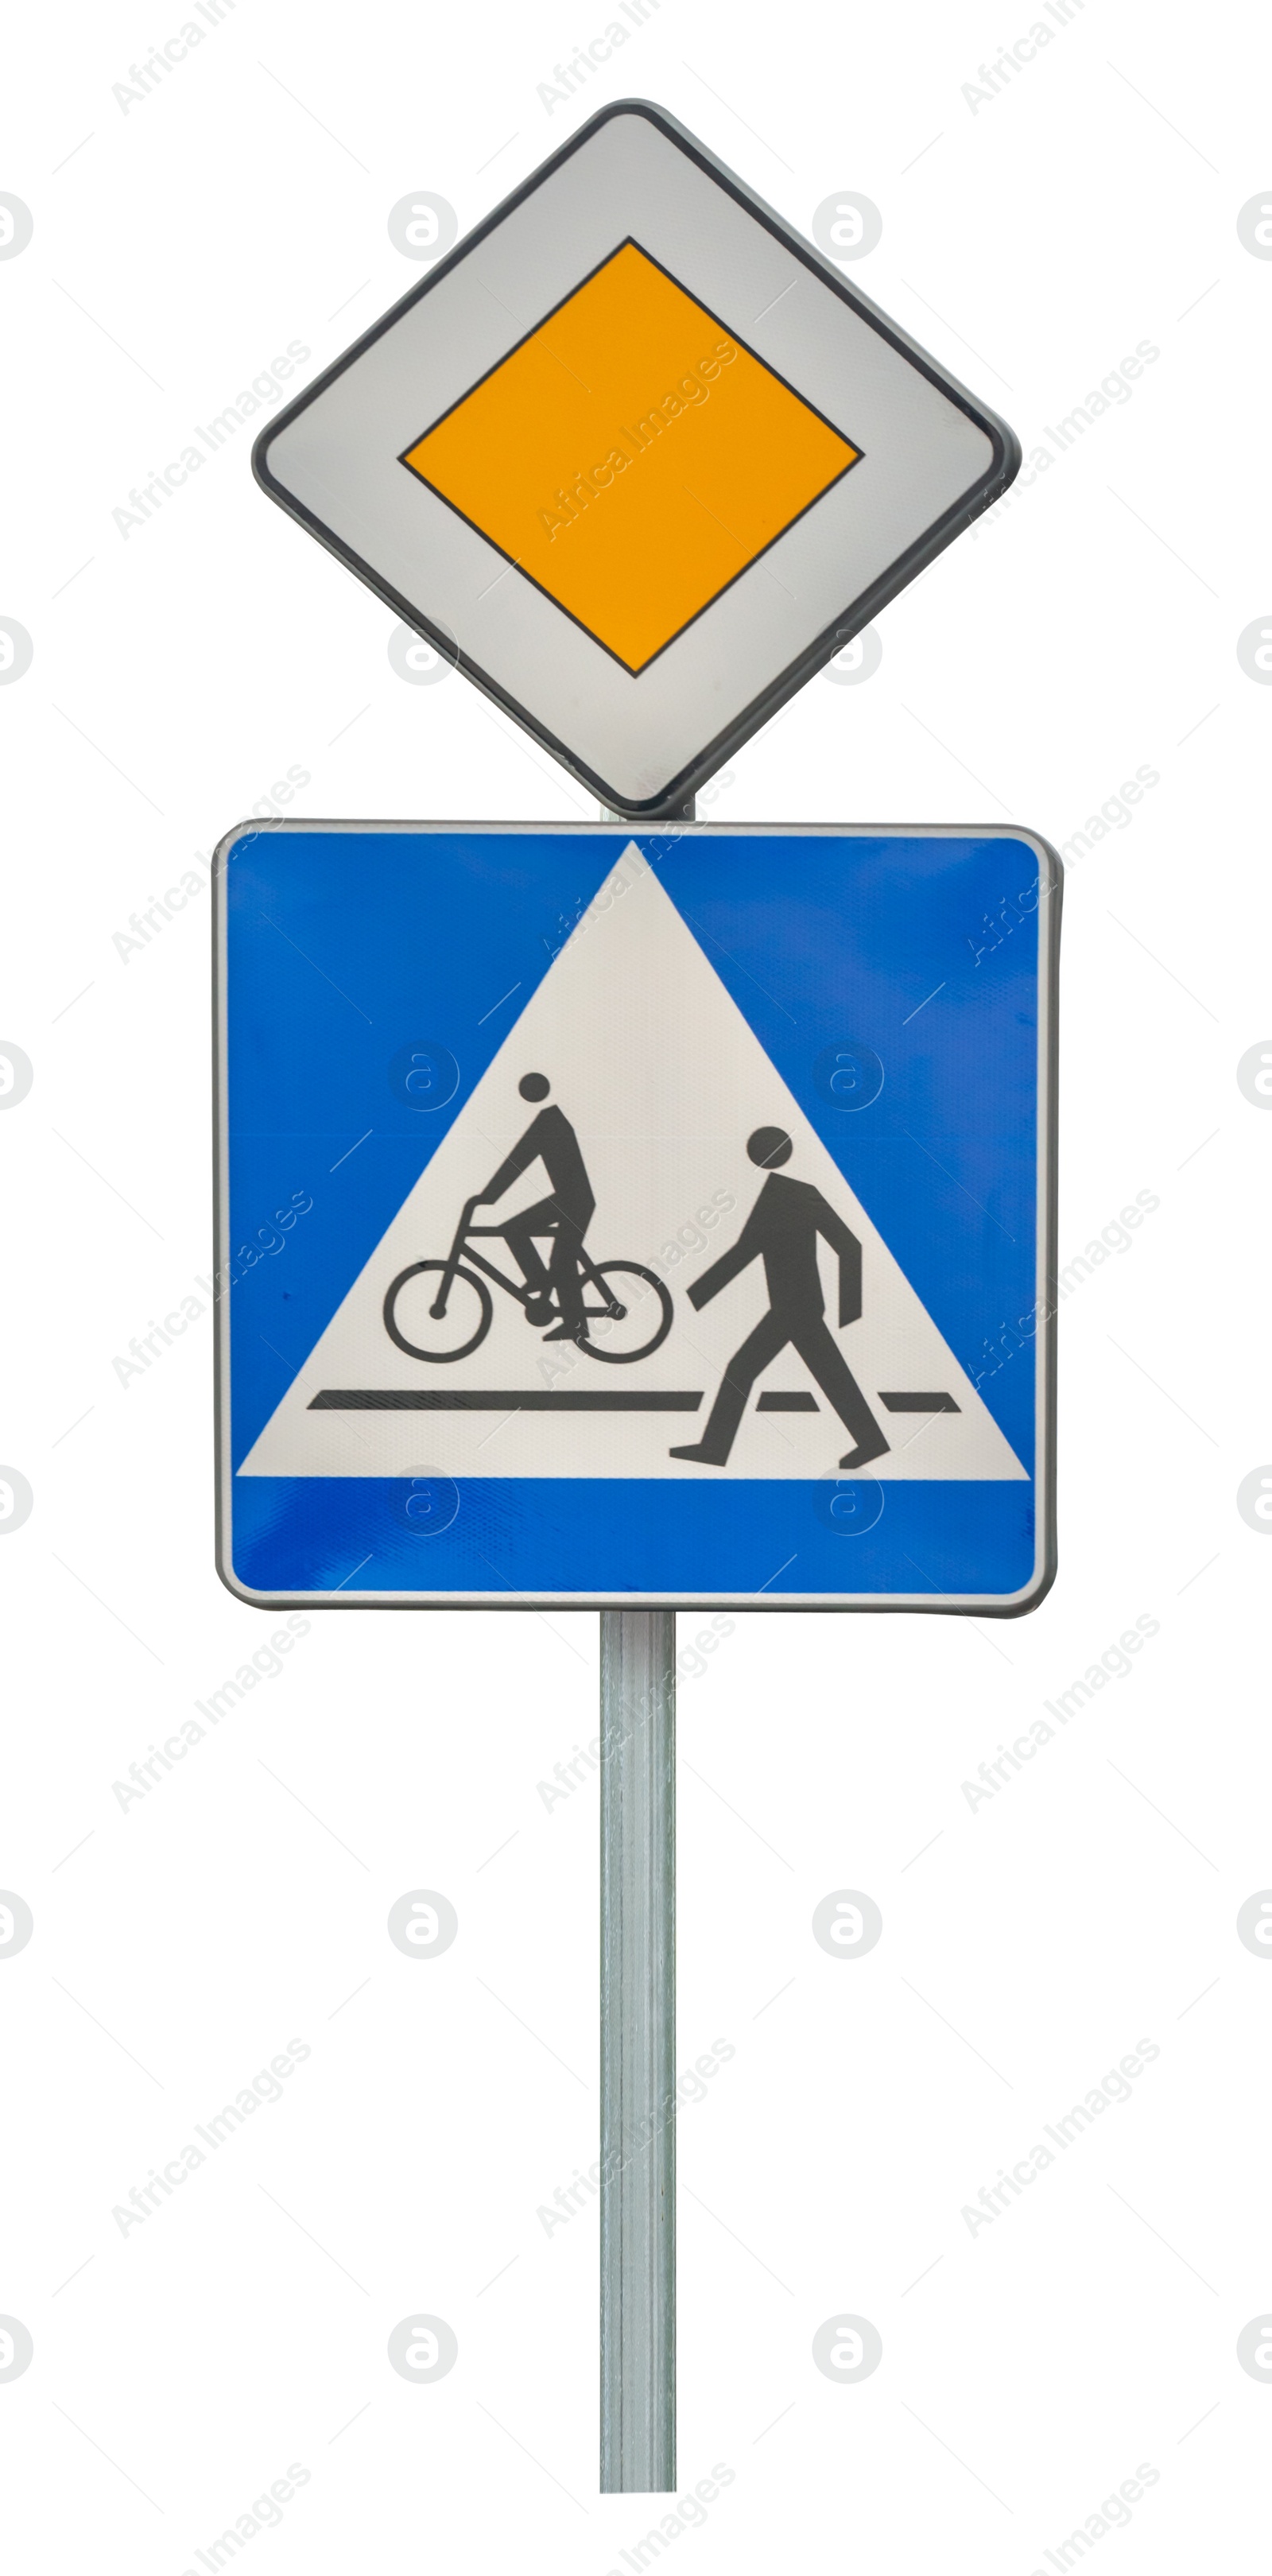 Image of Post with Priority Road and Pedestrian signs isolated on white